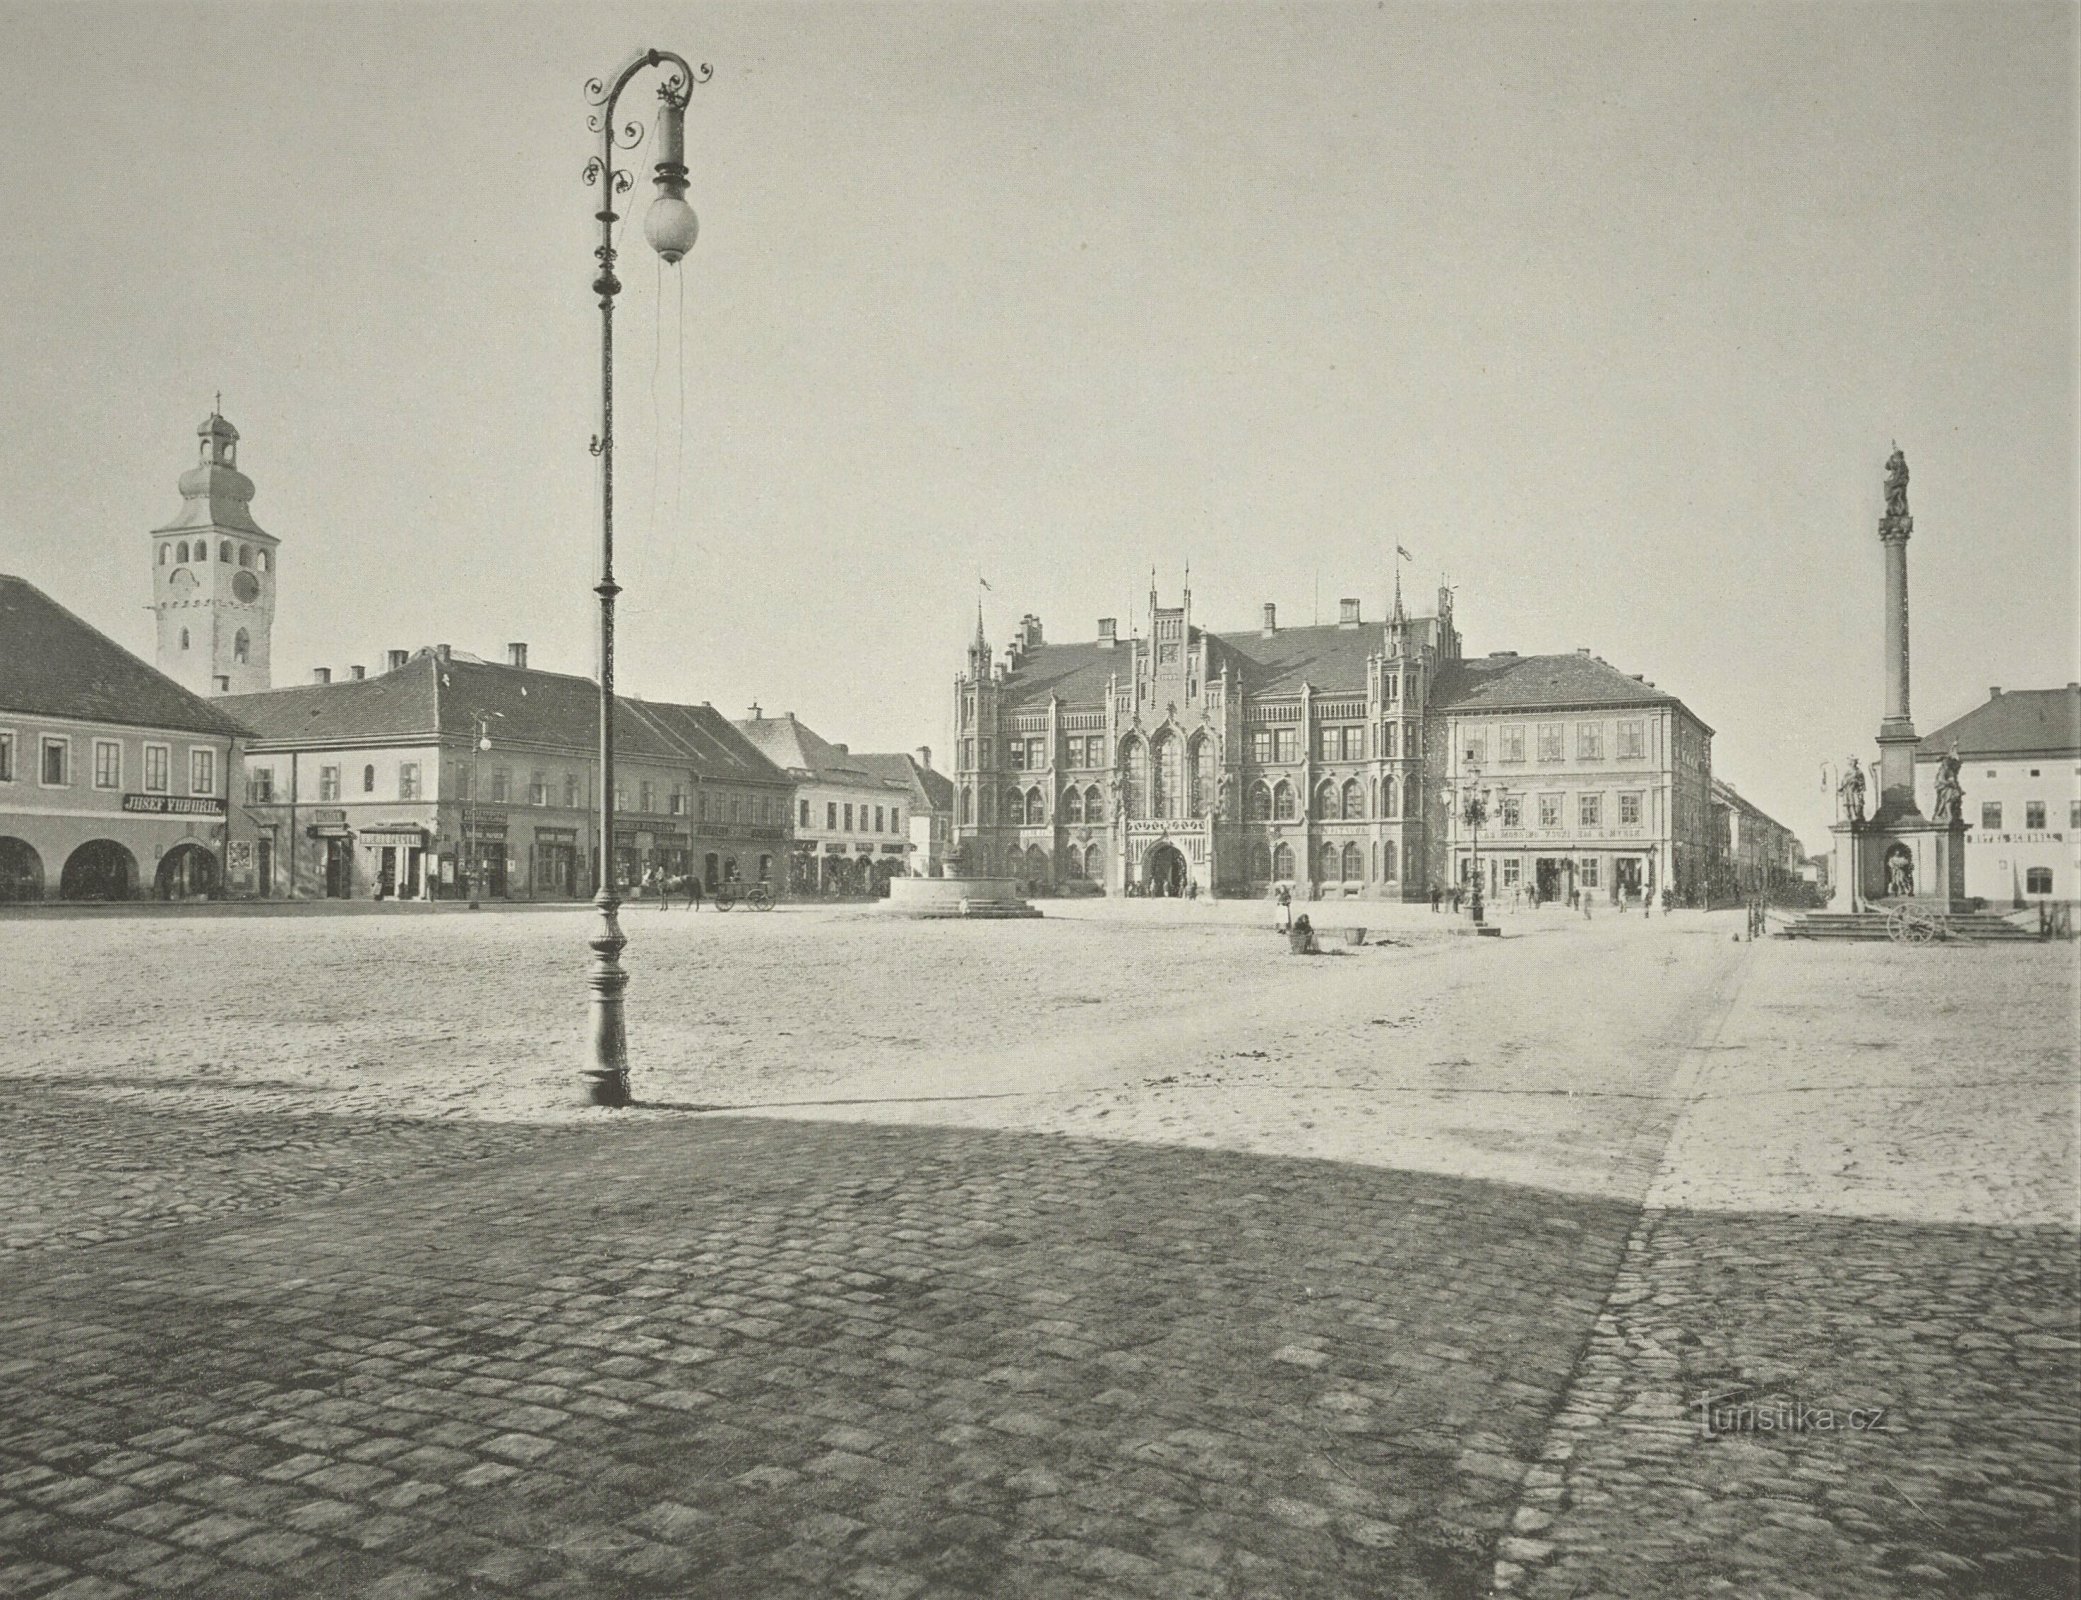 Town hall with square in Nové Bydžov (most likely 1897 or 1898)